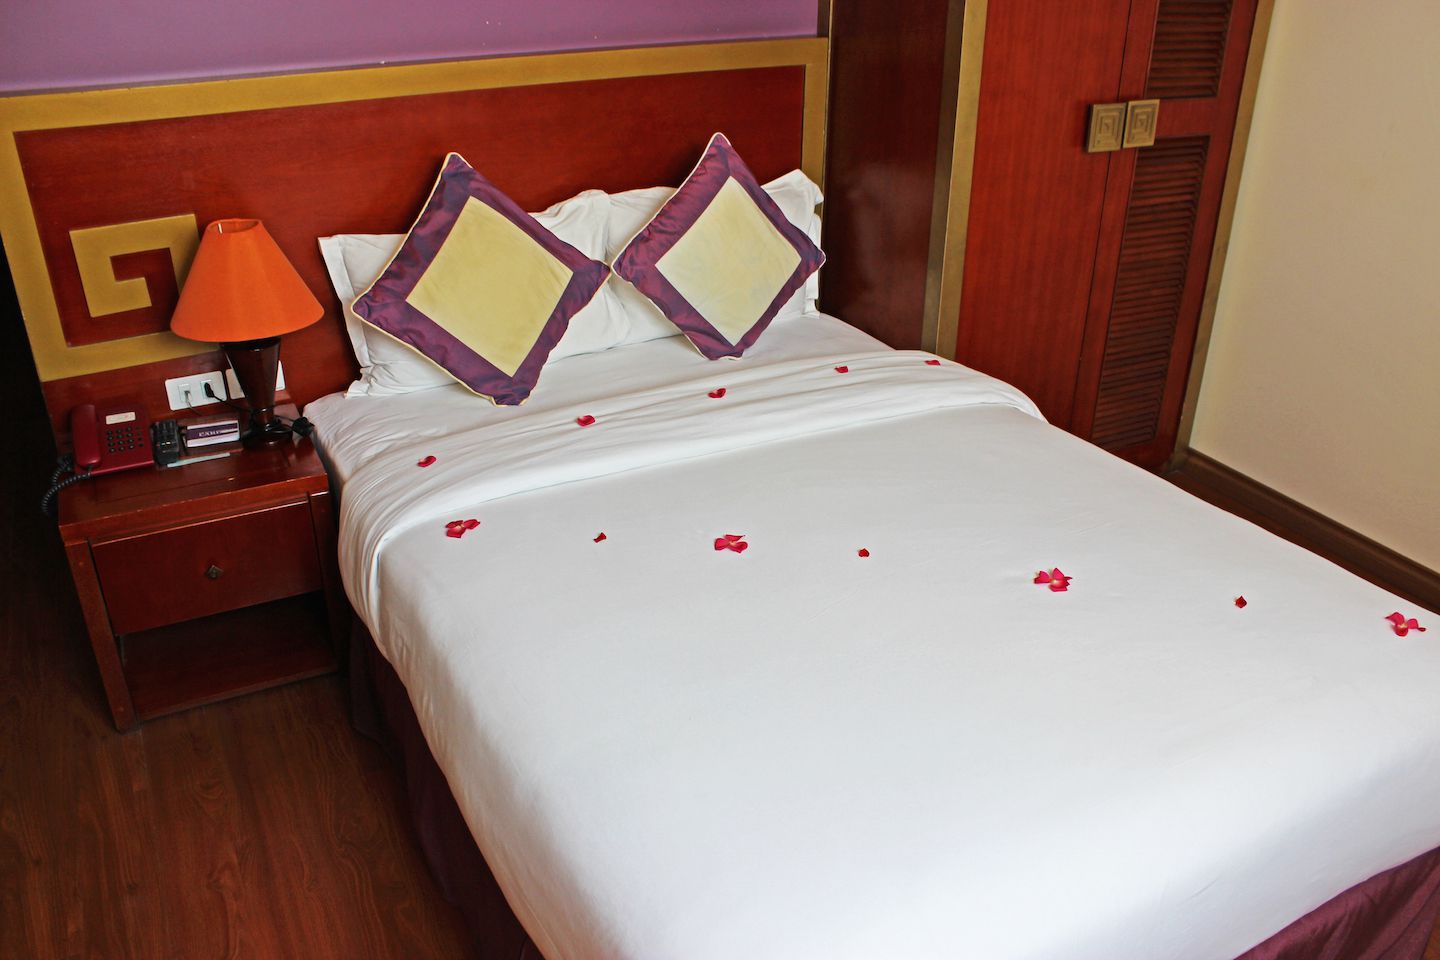 Our room at Aranya Hotel had even petals on the bed